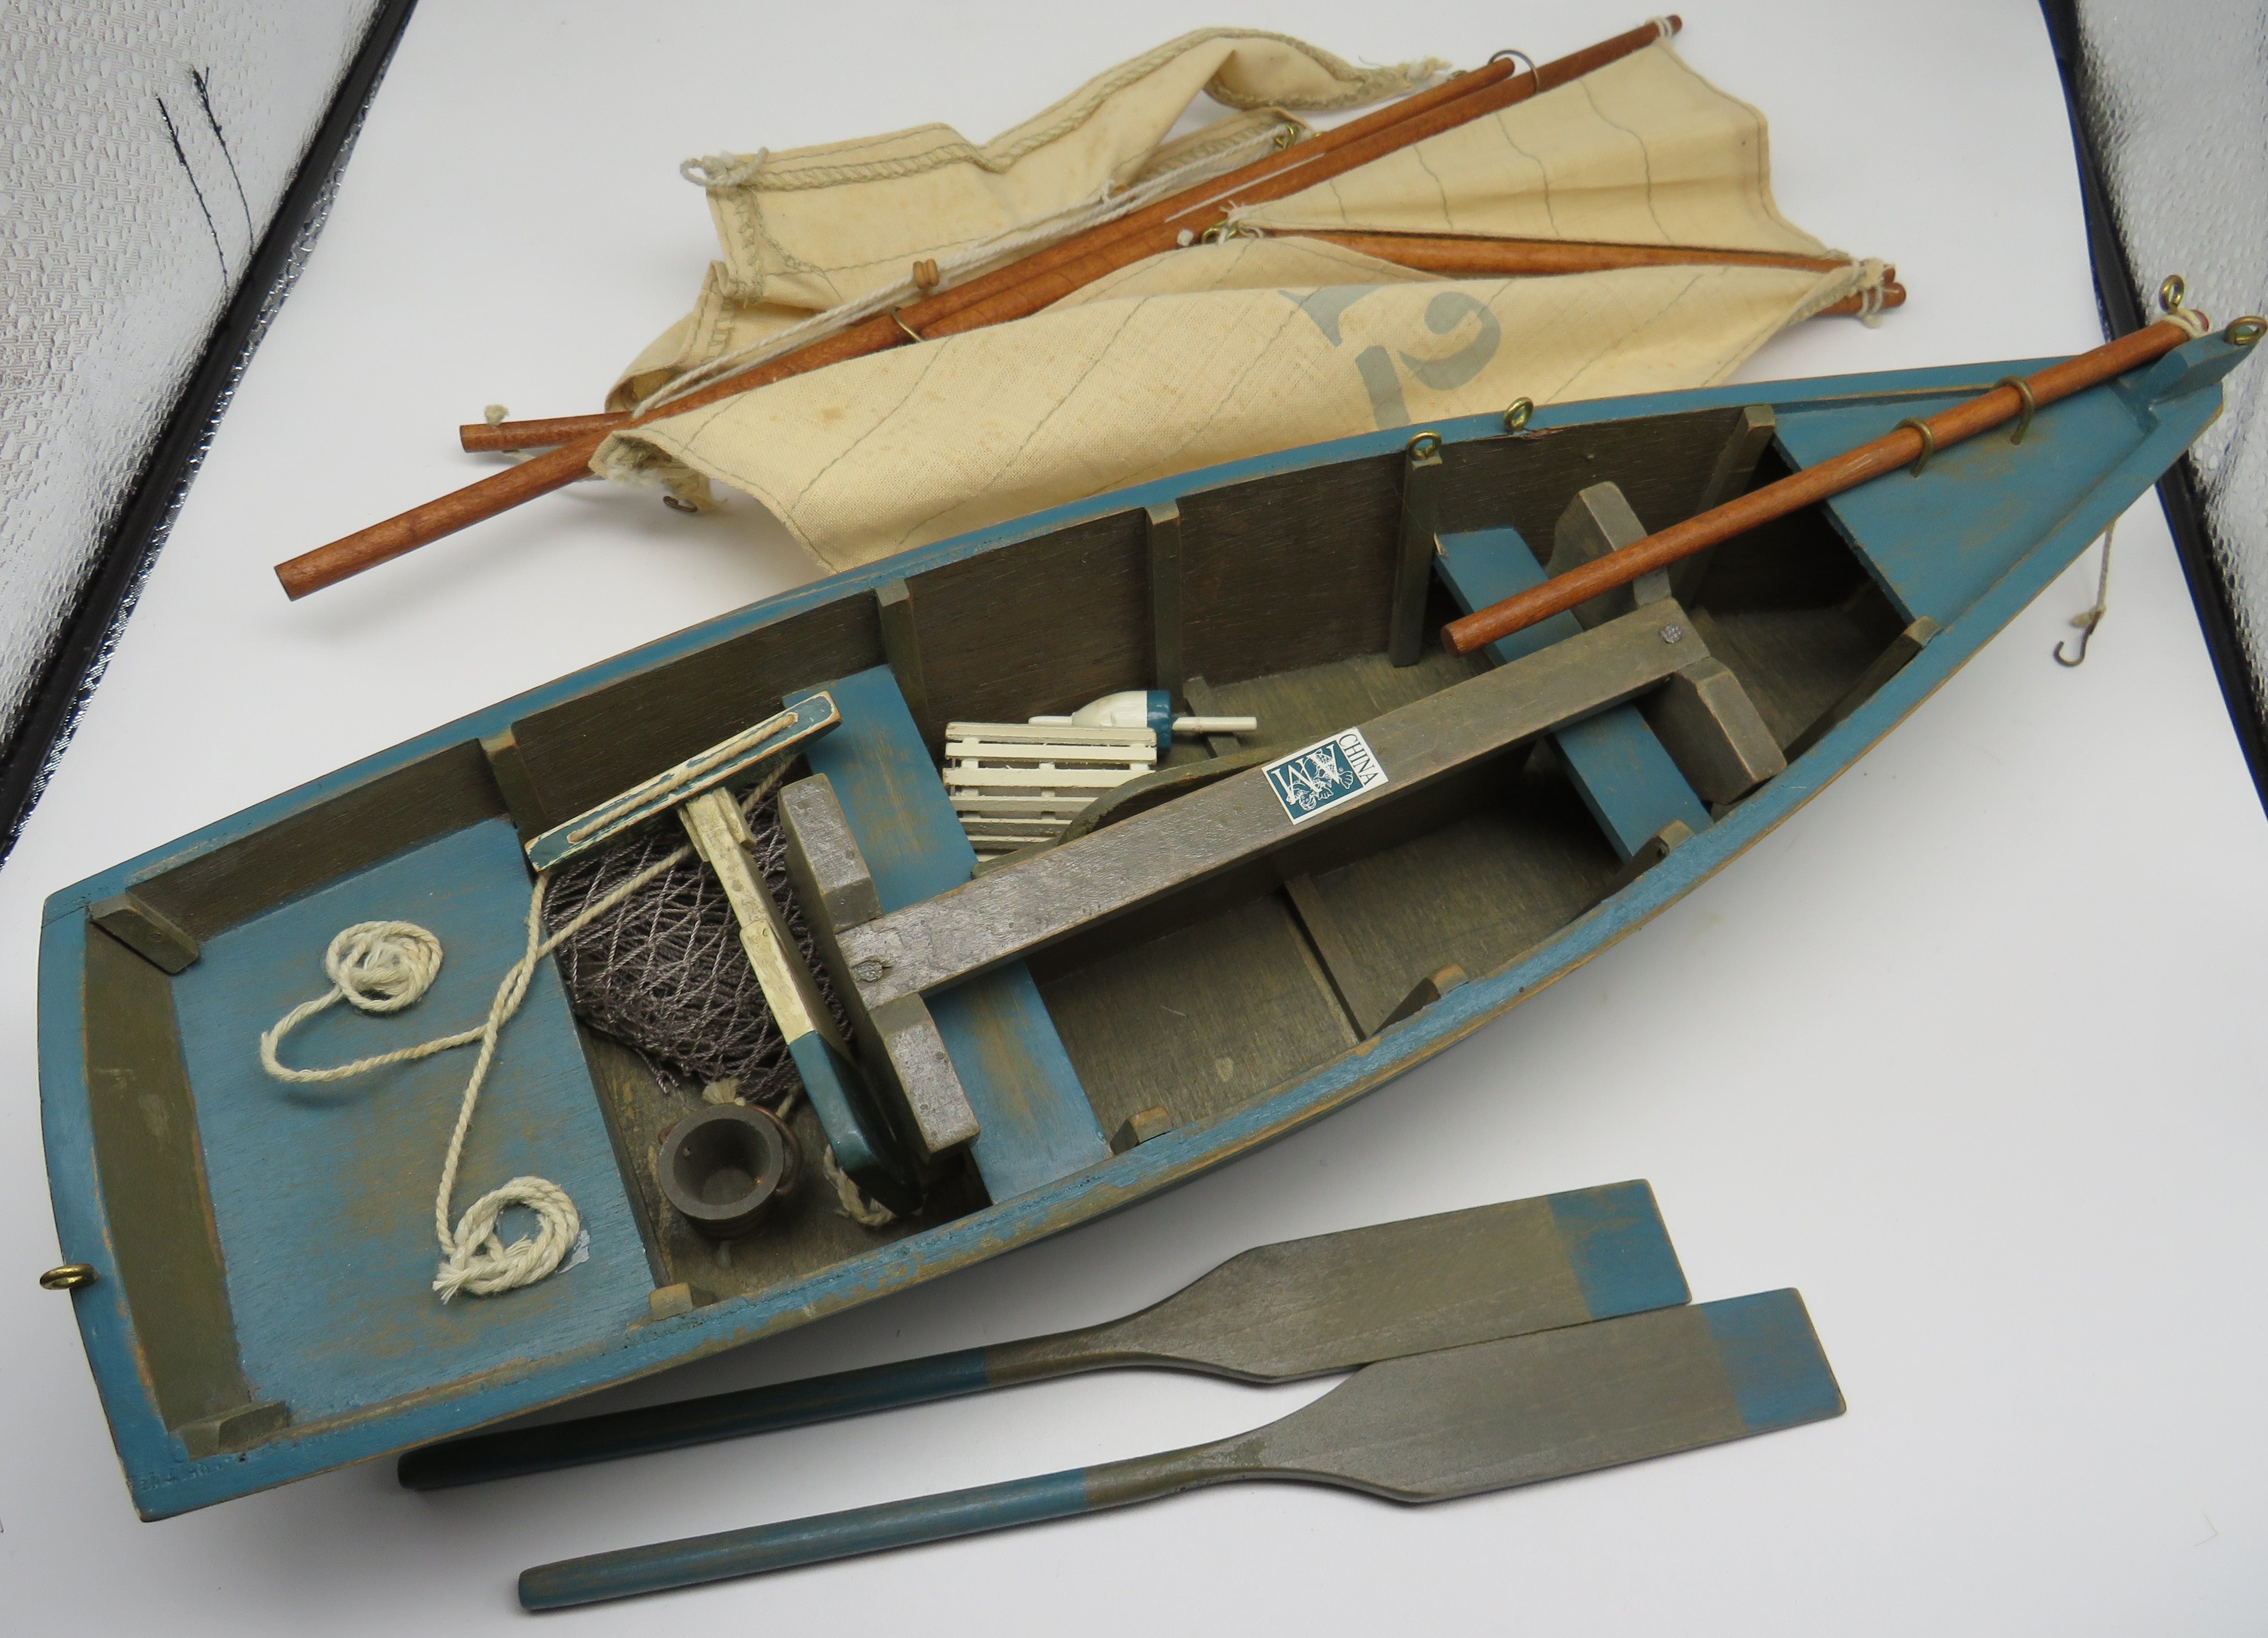 Authentic Models AS123 Y-12 Wooden Ship Model Yarmouth Cutter, Teal Sailboat OBSOLETE Discontinued NLA 